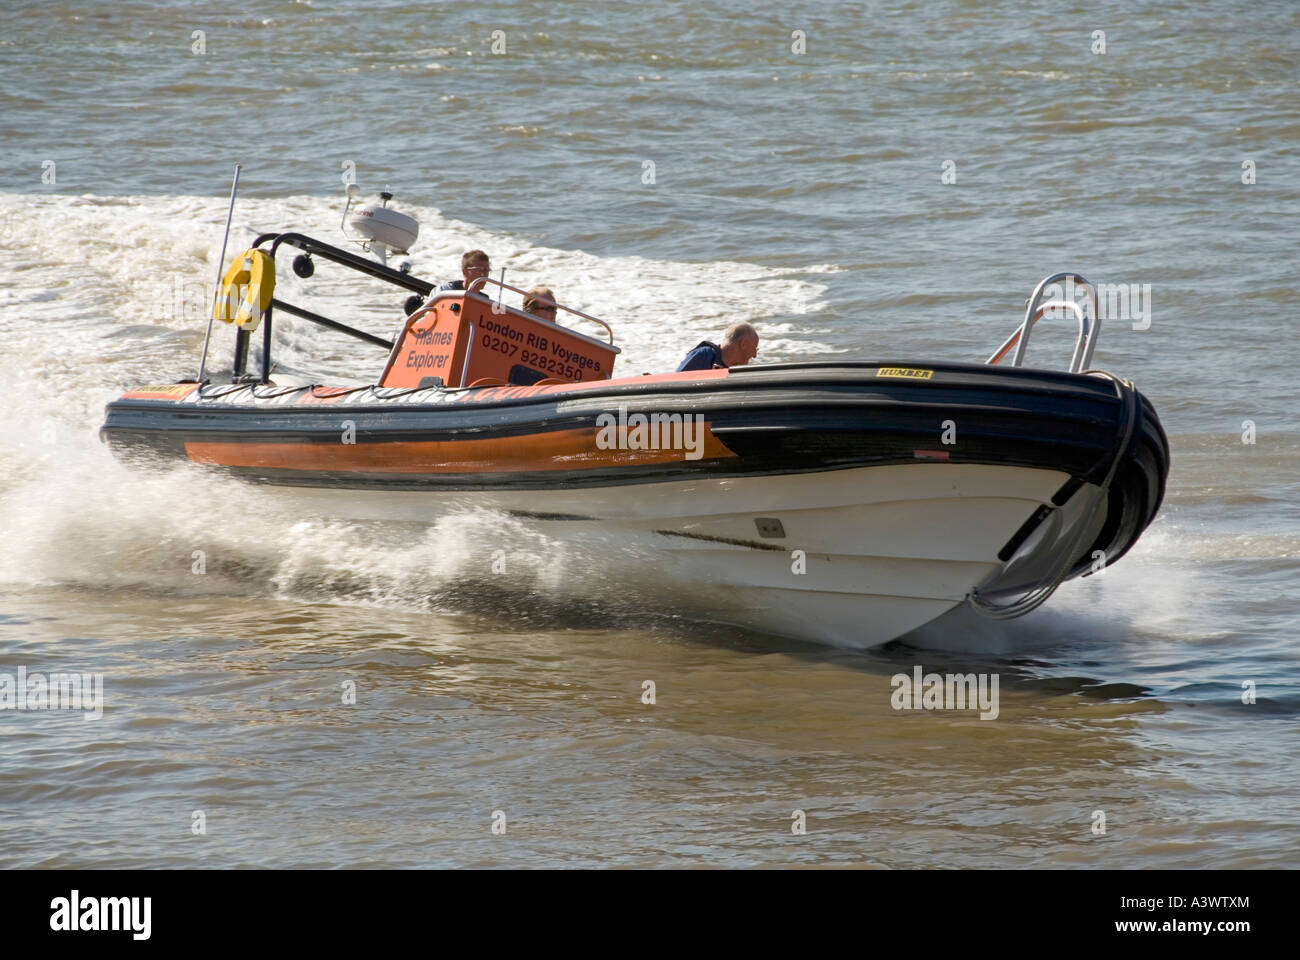 River Thames power boat based on inflatable construction carries out high speed manoeuvres near Canary Wharf Stock Photo